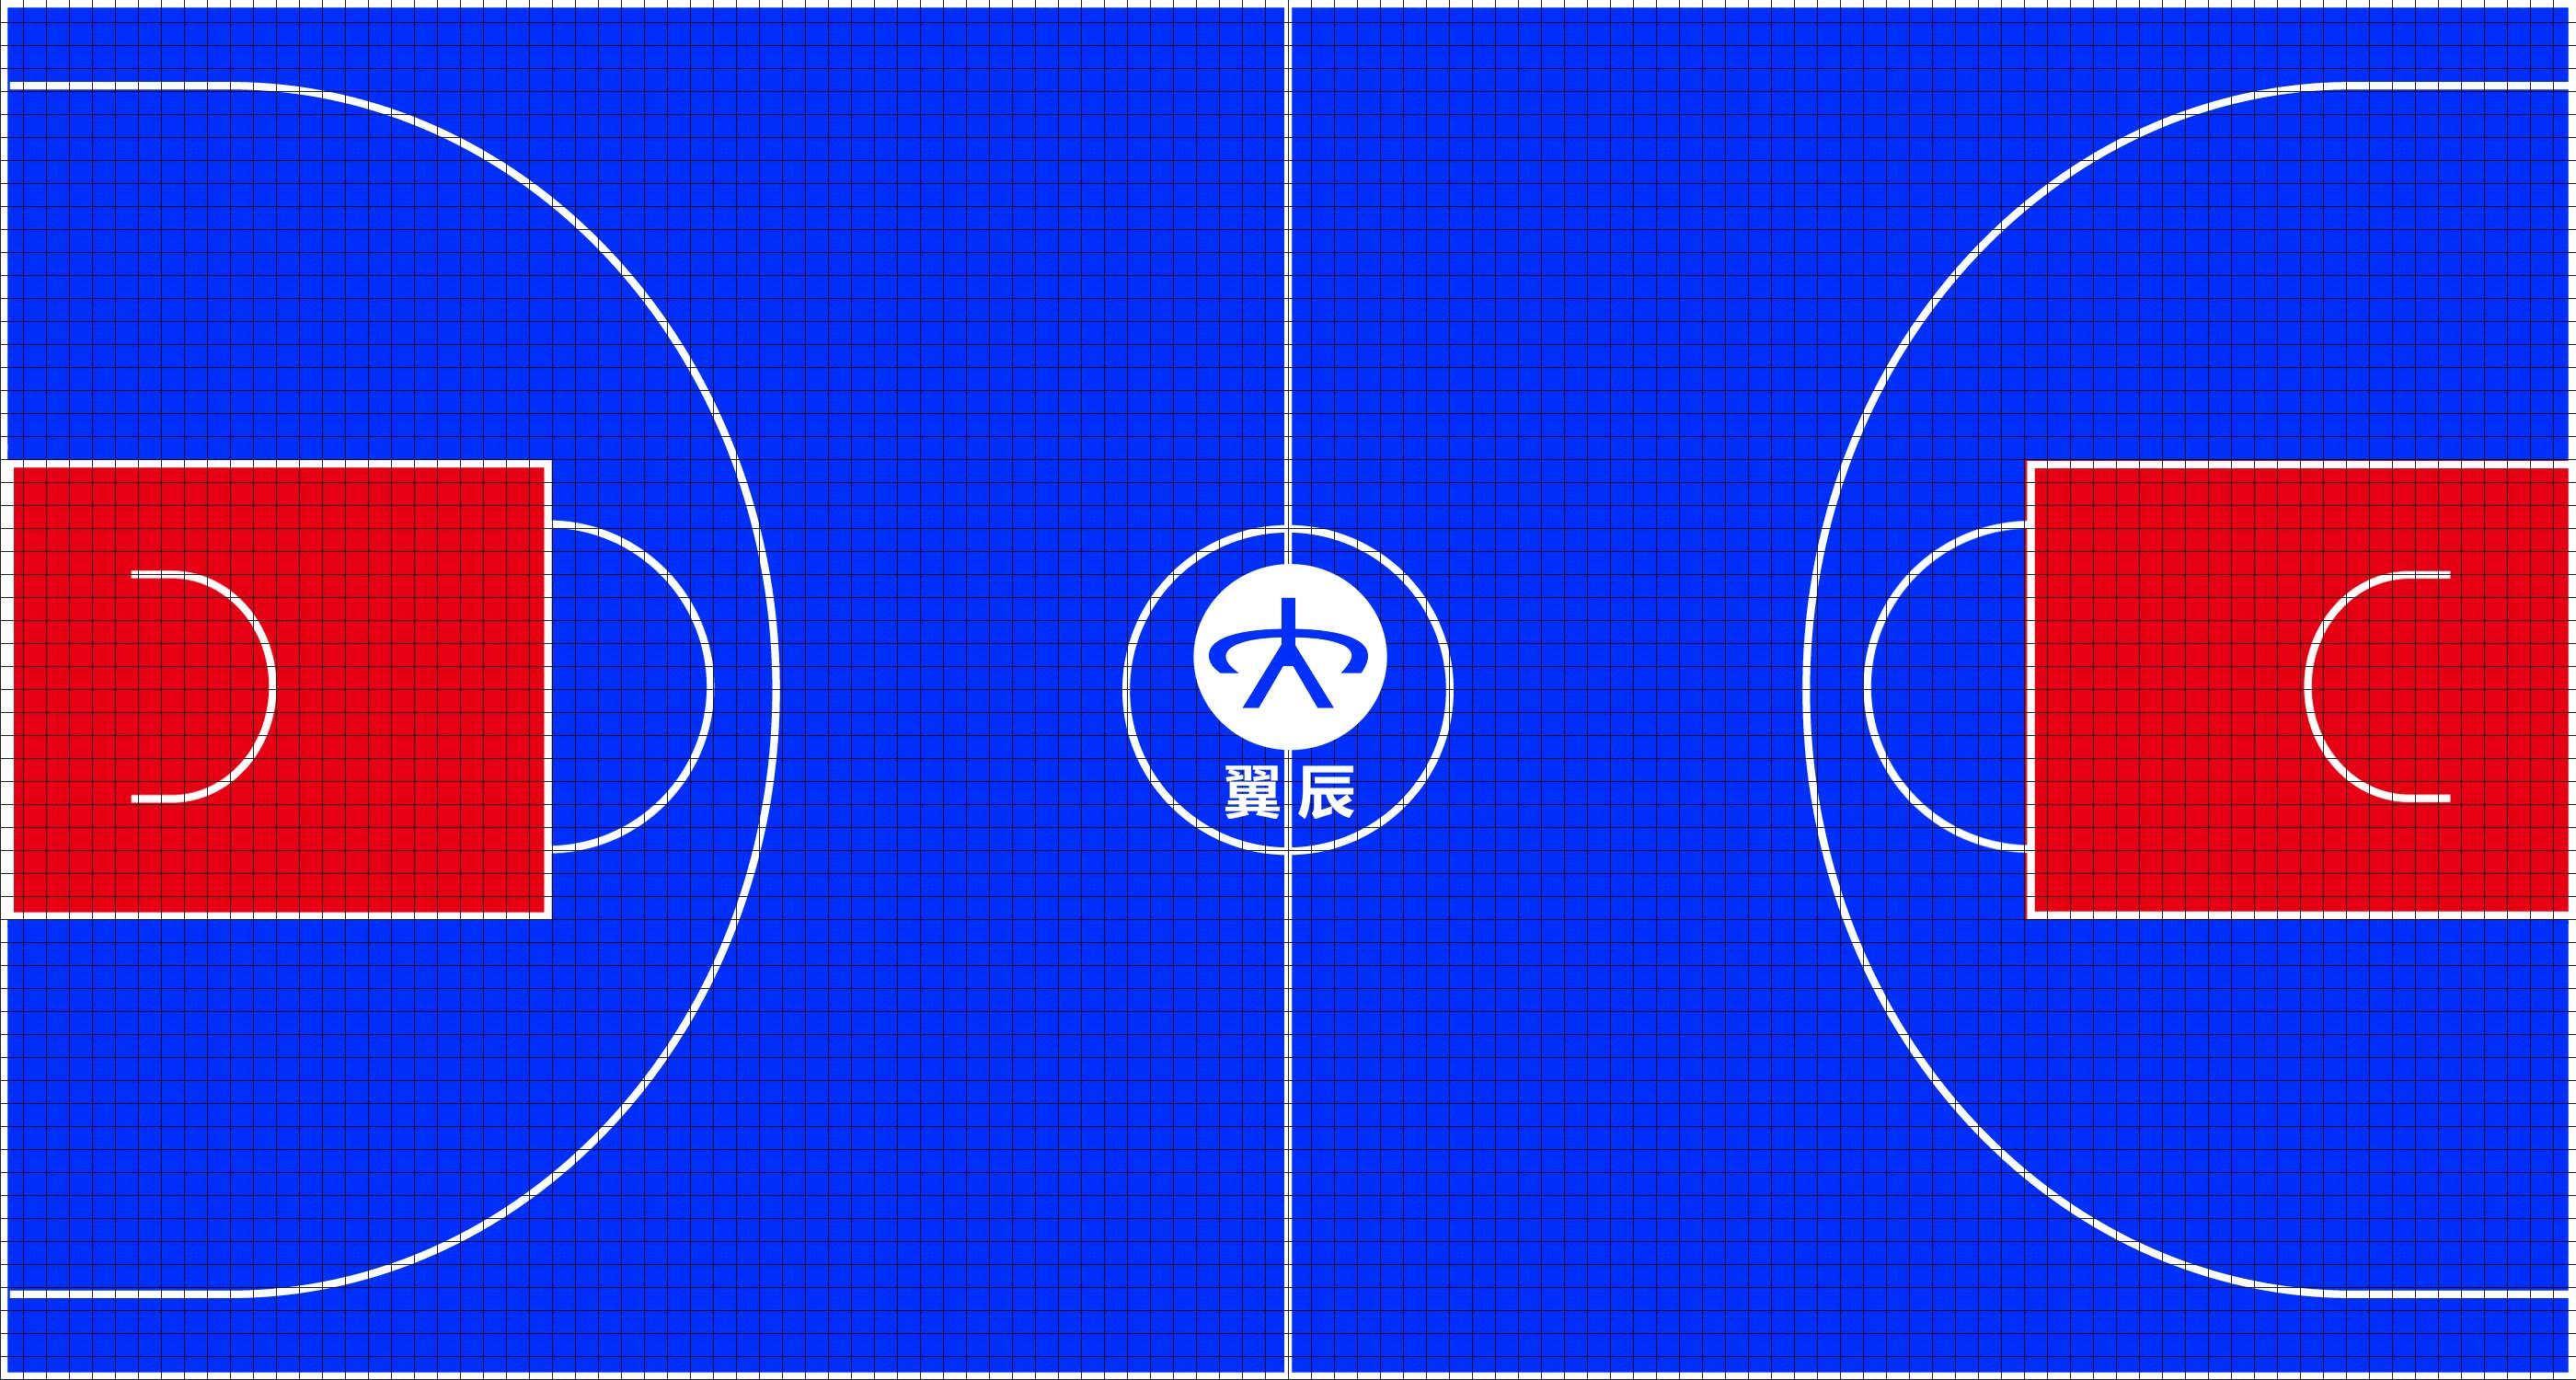 How to assemble the suspended floor of a basketball court?